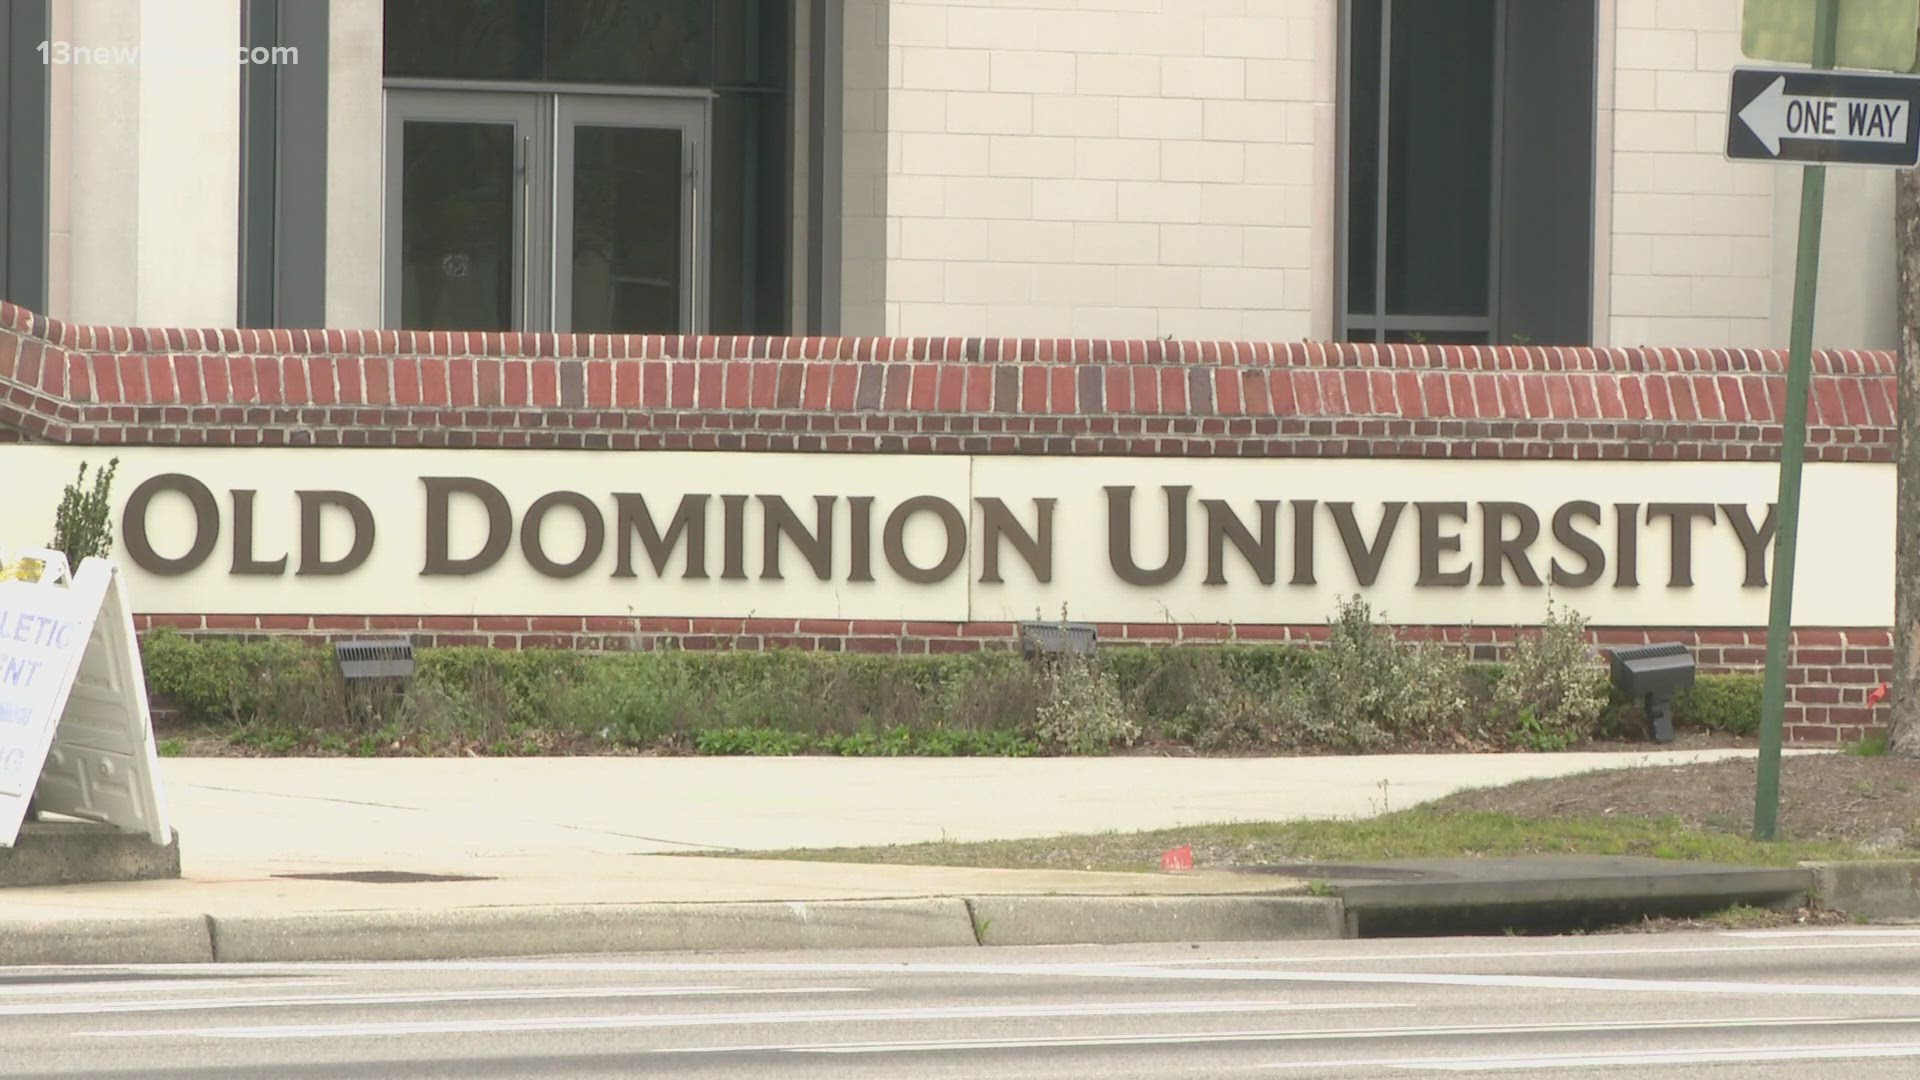 Both Old Dominion University and Christopher Newport University are considering increasing tuition for both in-state and out-of-state students.